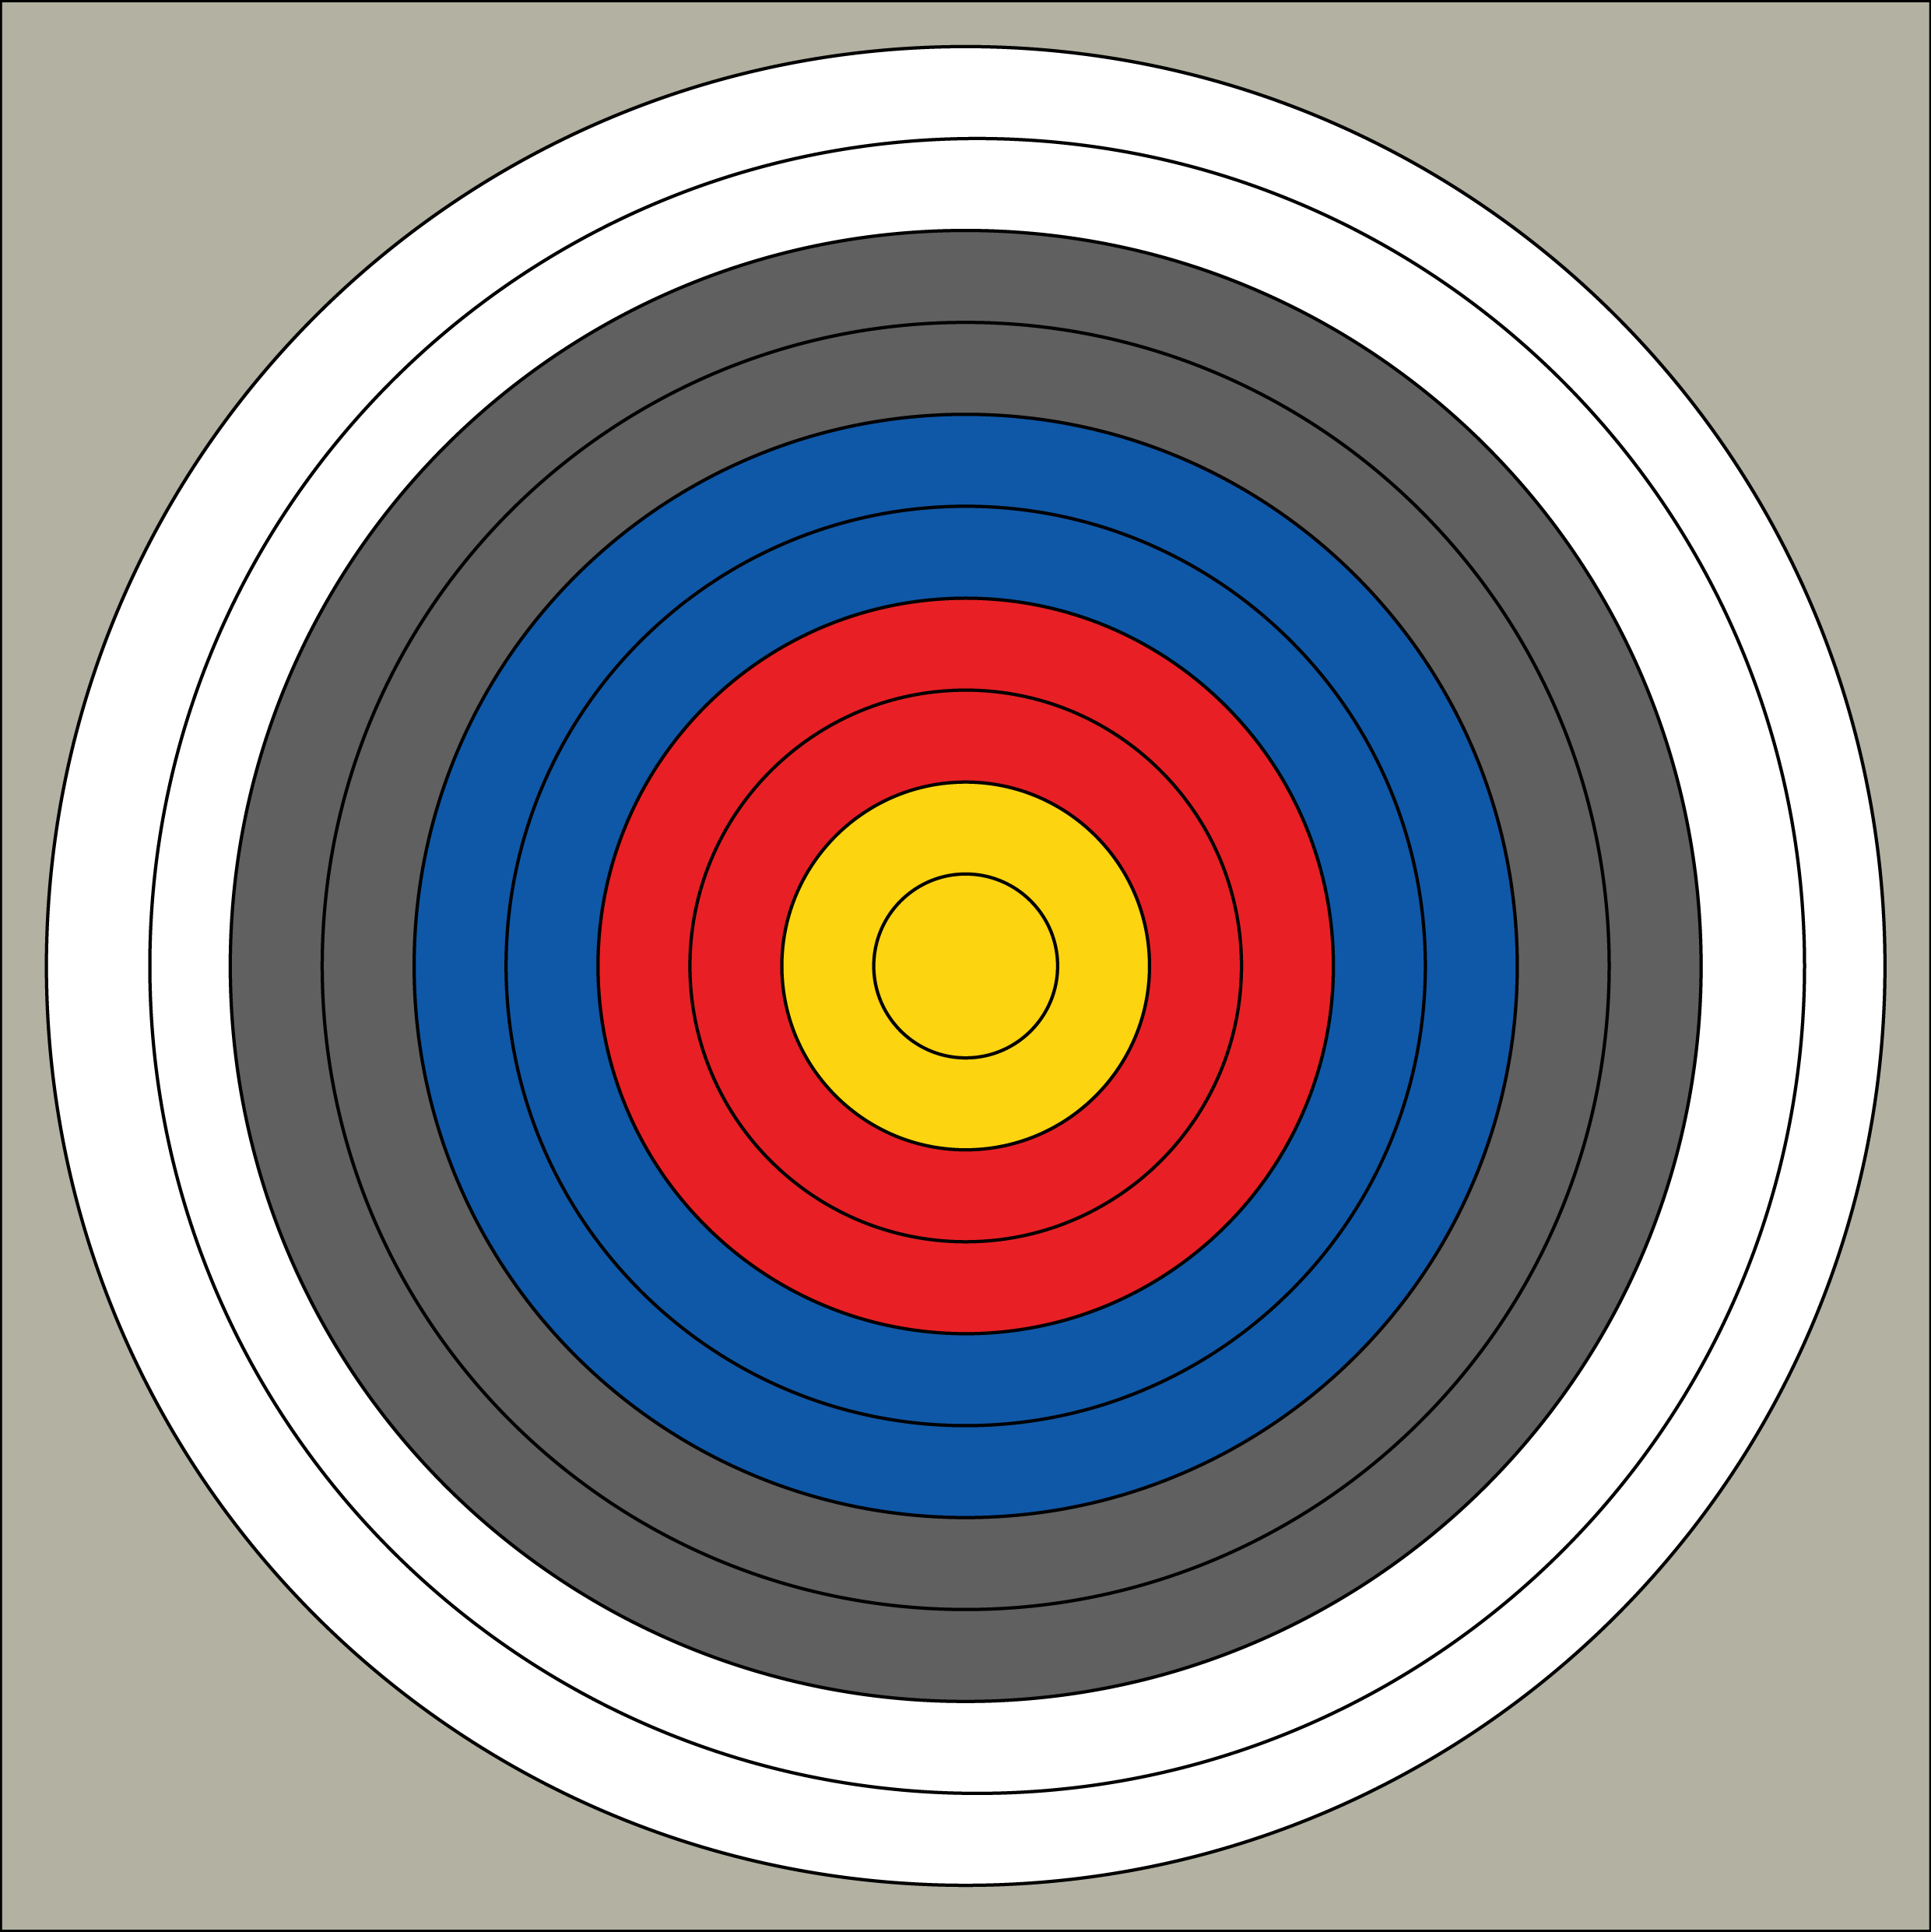 Targets Blue Red Yellow Circle 2481x2482